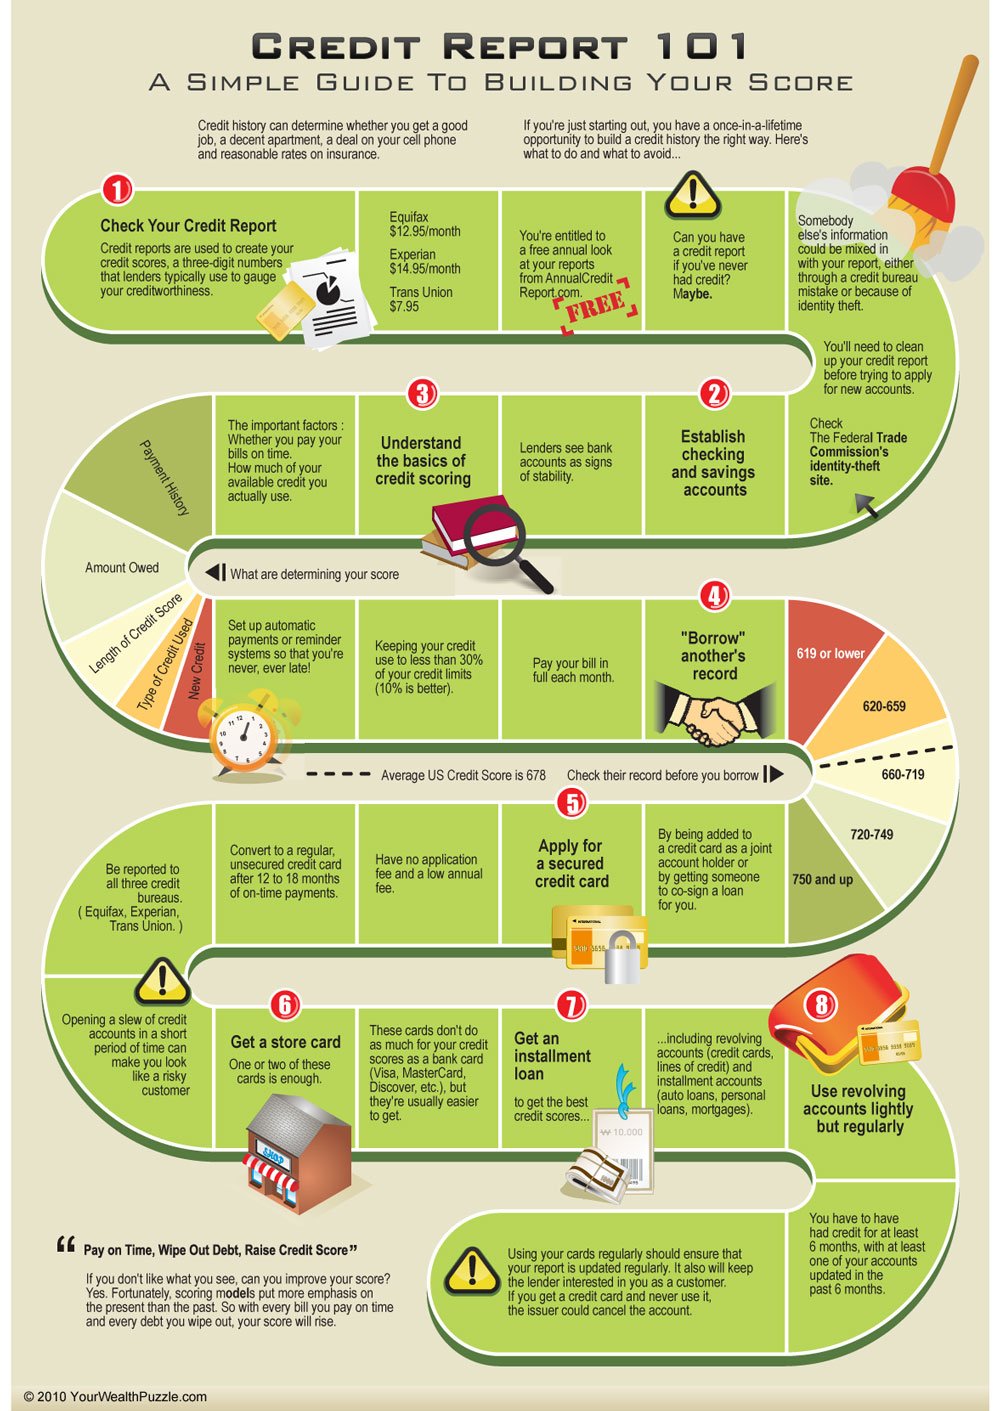 Steps To Build Your Credit Score [Infographic]